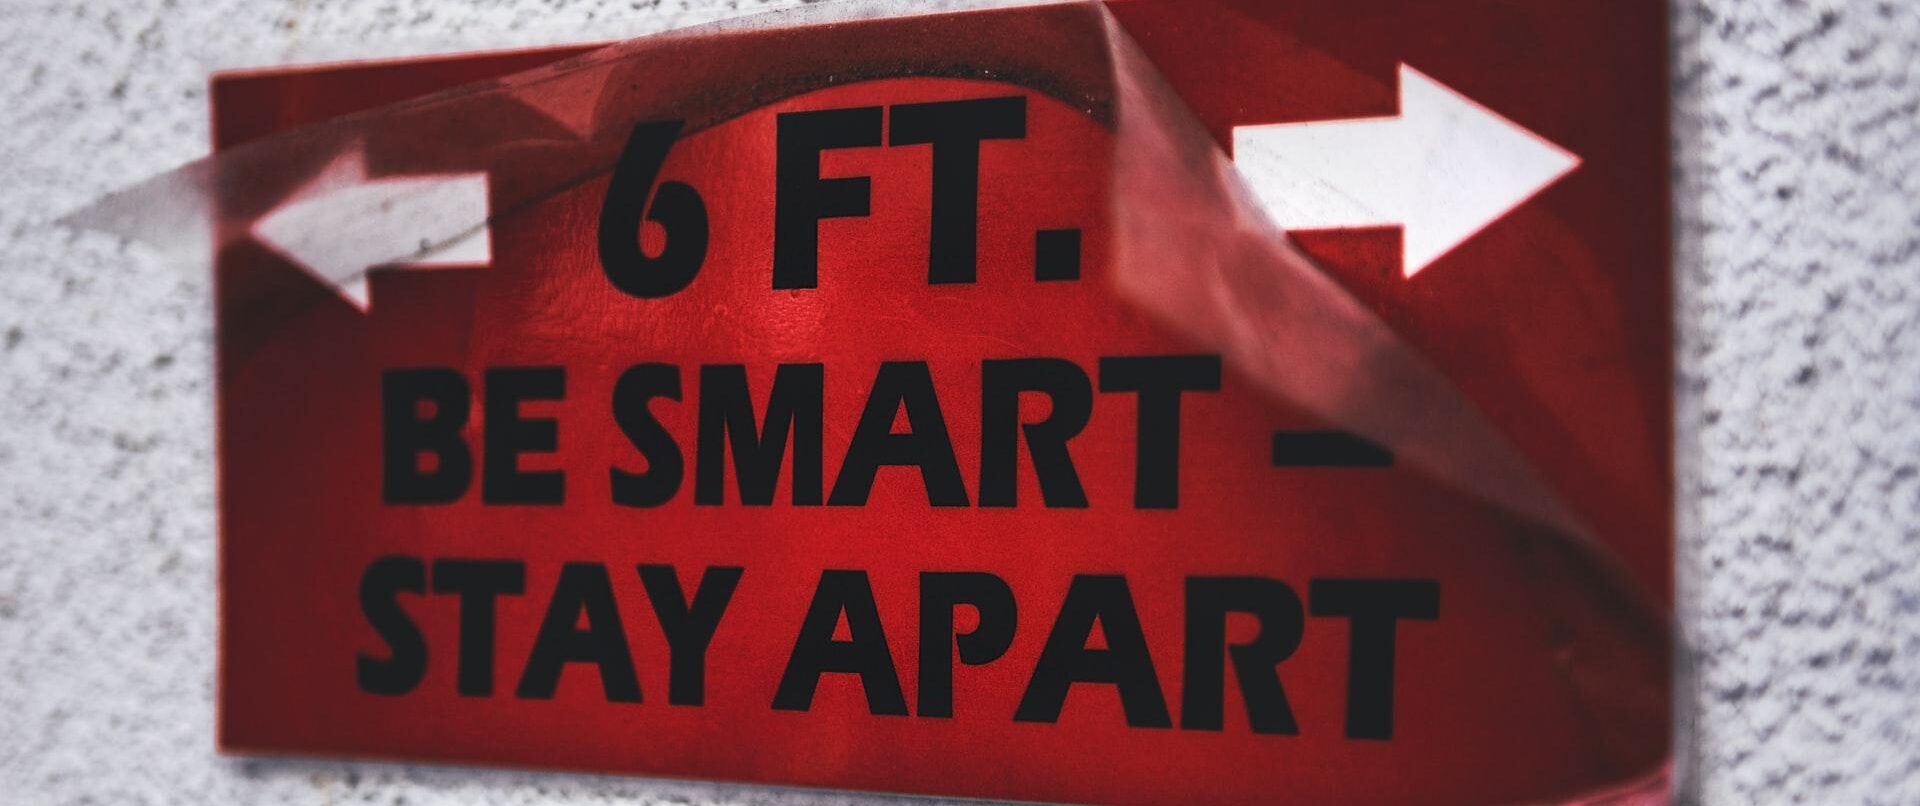 6 ft. be smart-stay apart Safety Labels